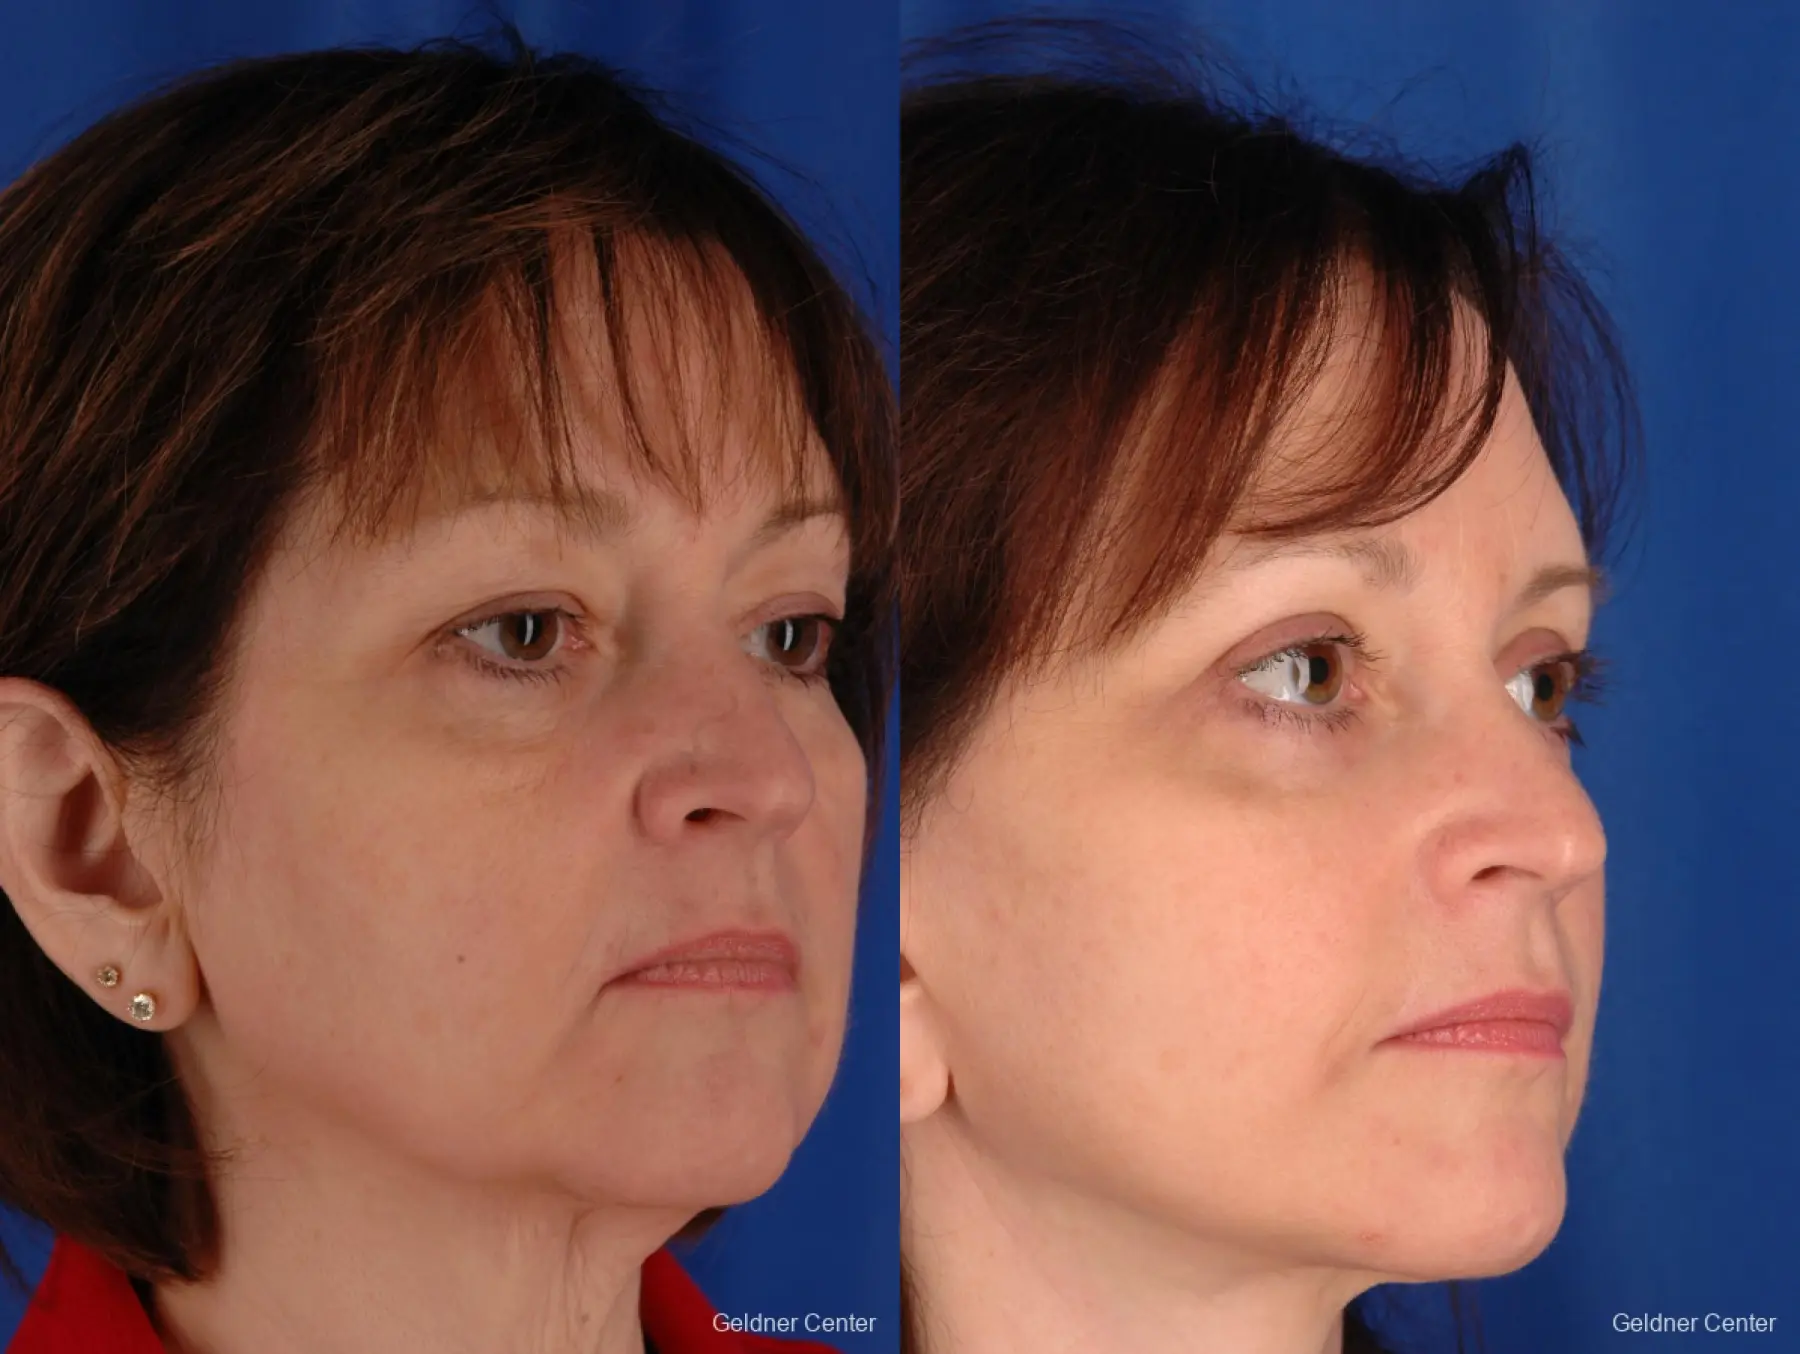 Facelift: Patient 3 - Before and After 3